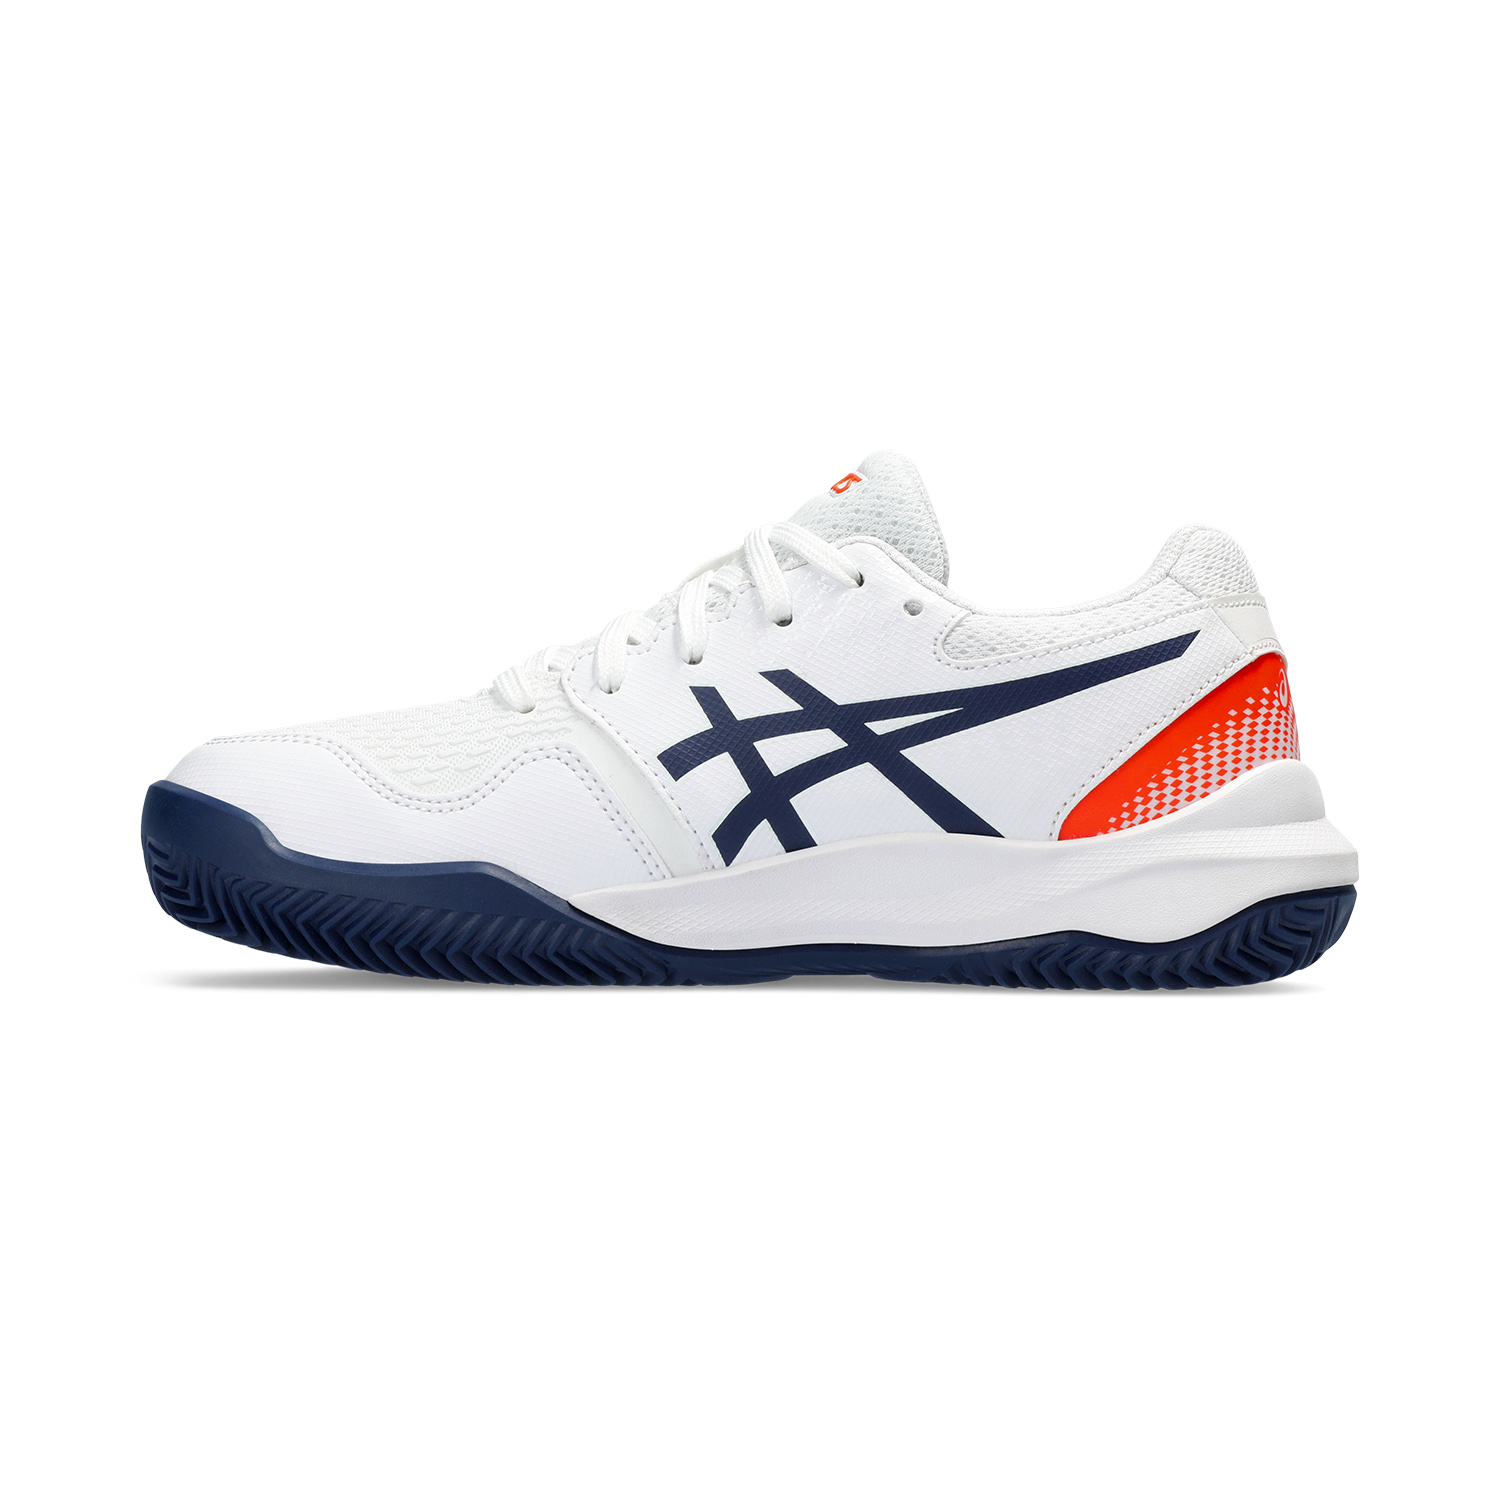 Asics Gel Resolution 9 GS Clay Bambini - White/Blue Expanse